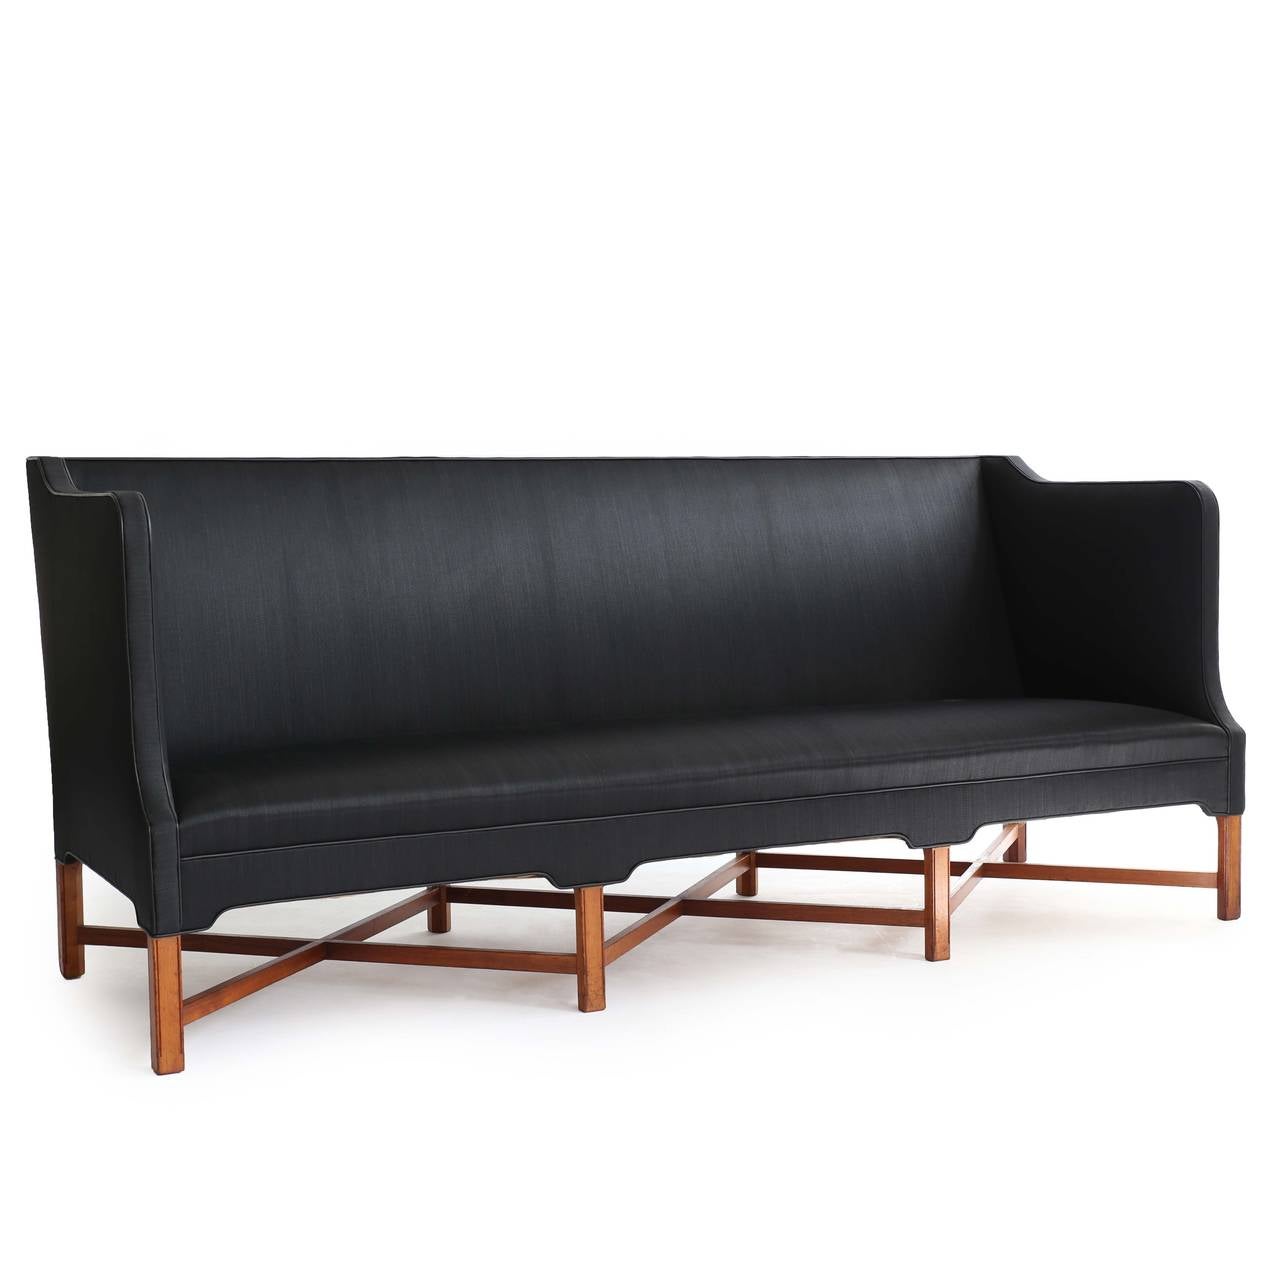 A freestanding three seater Kaare klint sofa with eight-legged profiled mahogany frame upholstered with black horsehair. 

Designed by Kaare Klint 1930 and made by cabinetmaker Rud. Rasmussen, Copenhagen, Denmark, model 4118. Underside with